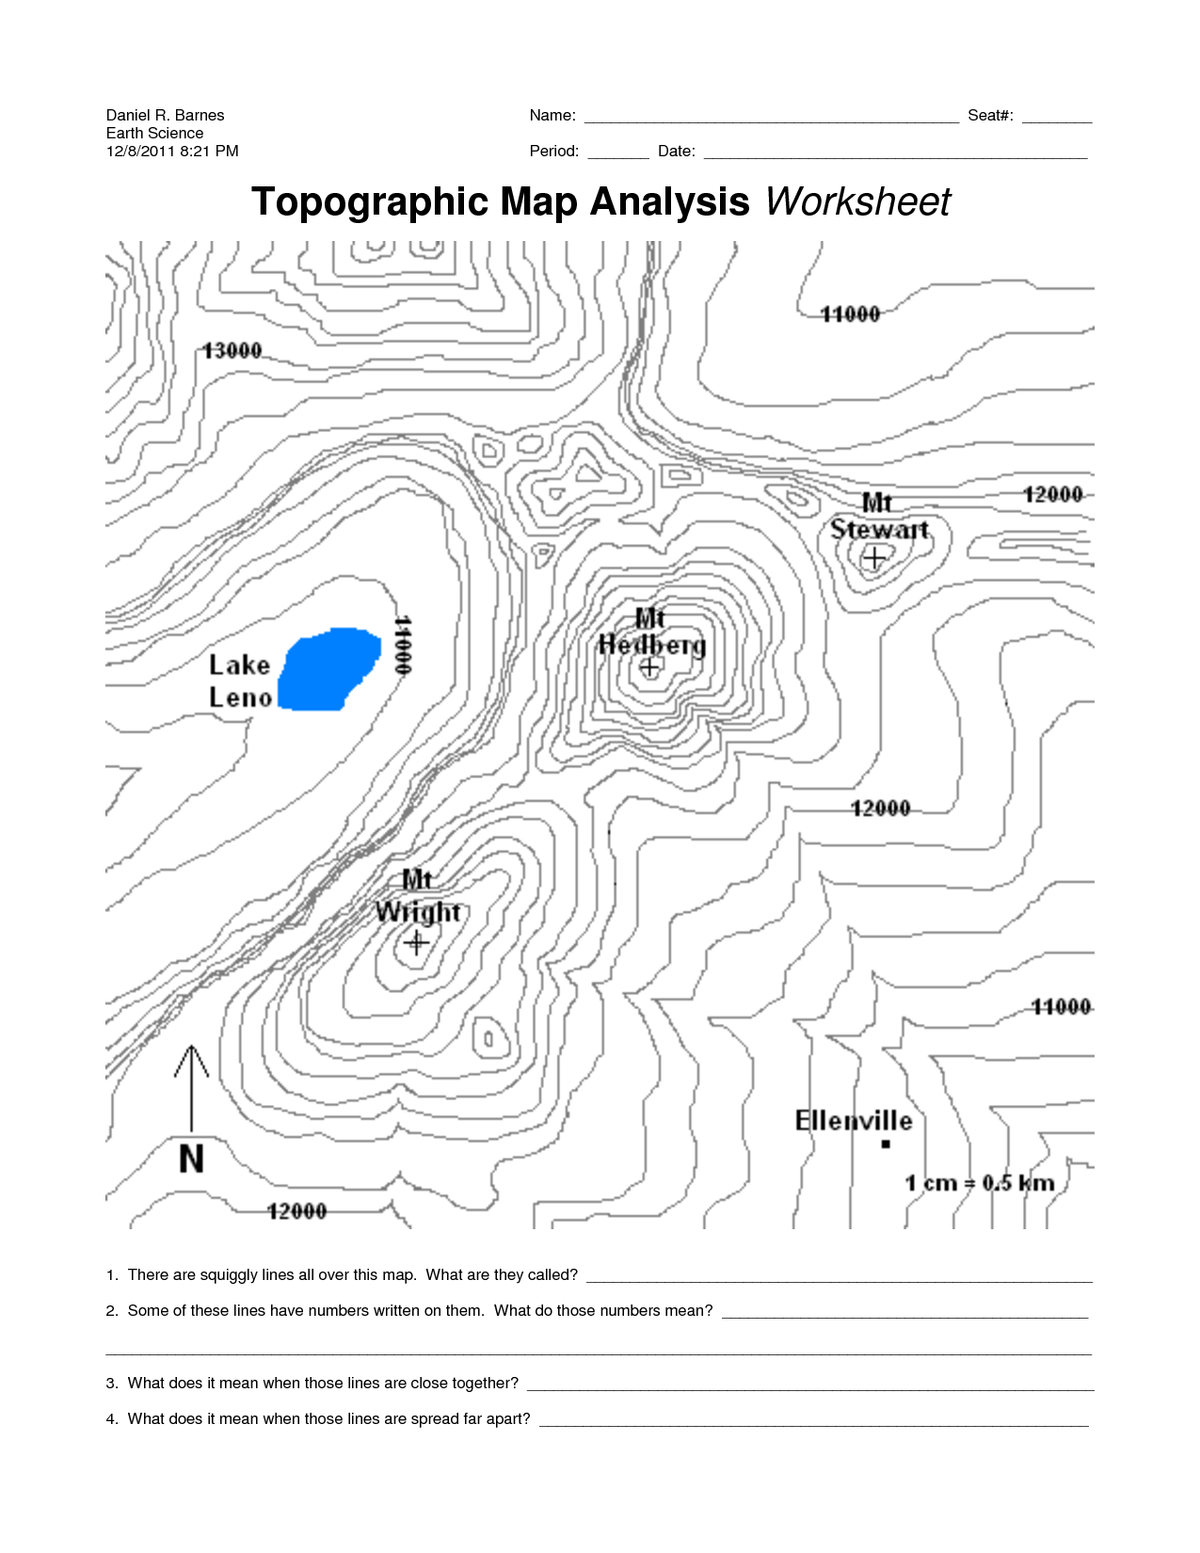 Daniel R. Barnes
Earth Science
12/8/2011 8:21 PM
Name:
Seat#:
Period:
Date:
Topographic Map Analysis Worksheet
11000
13000.
12000-
Mt
Ştewait,
Hedberg
Lake
Leno
7
12000
Mt
Wright
+)
11000
Ellenville
1 cm = 0.5 km
42000
1. There are squiggly lines all over this map. What are they called?
2. Some of these lines have numbers written on them. What do those numbers mean?
3. What does it mean when those lines are close together?
4. What does it mean when those lines are spread far apart?
11000
